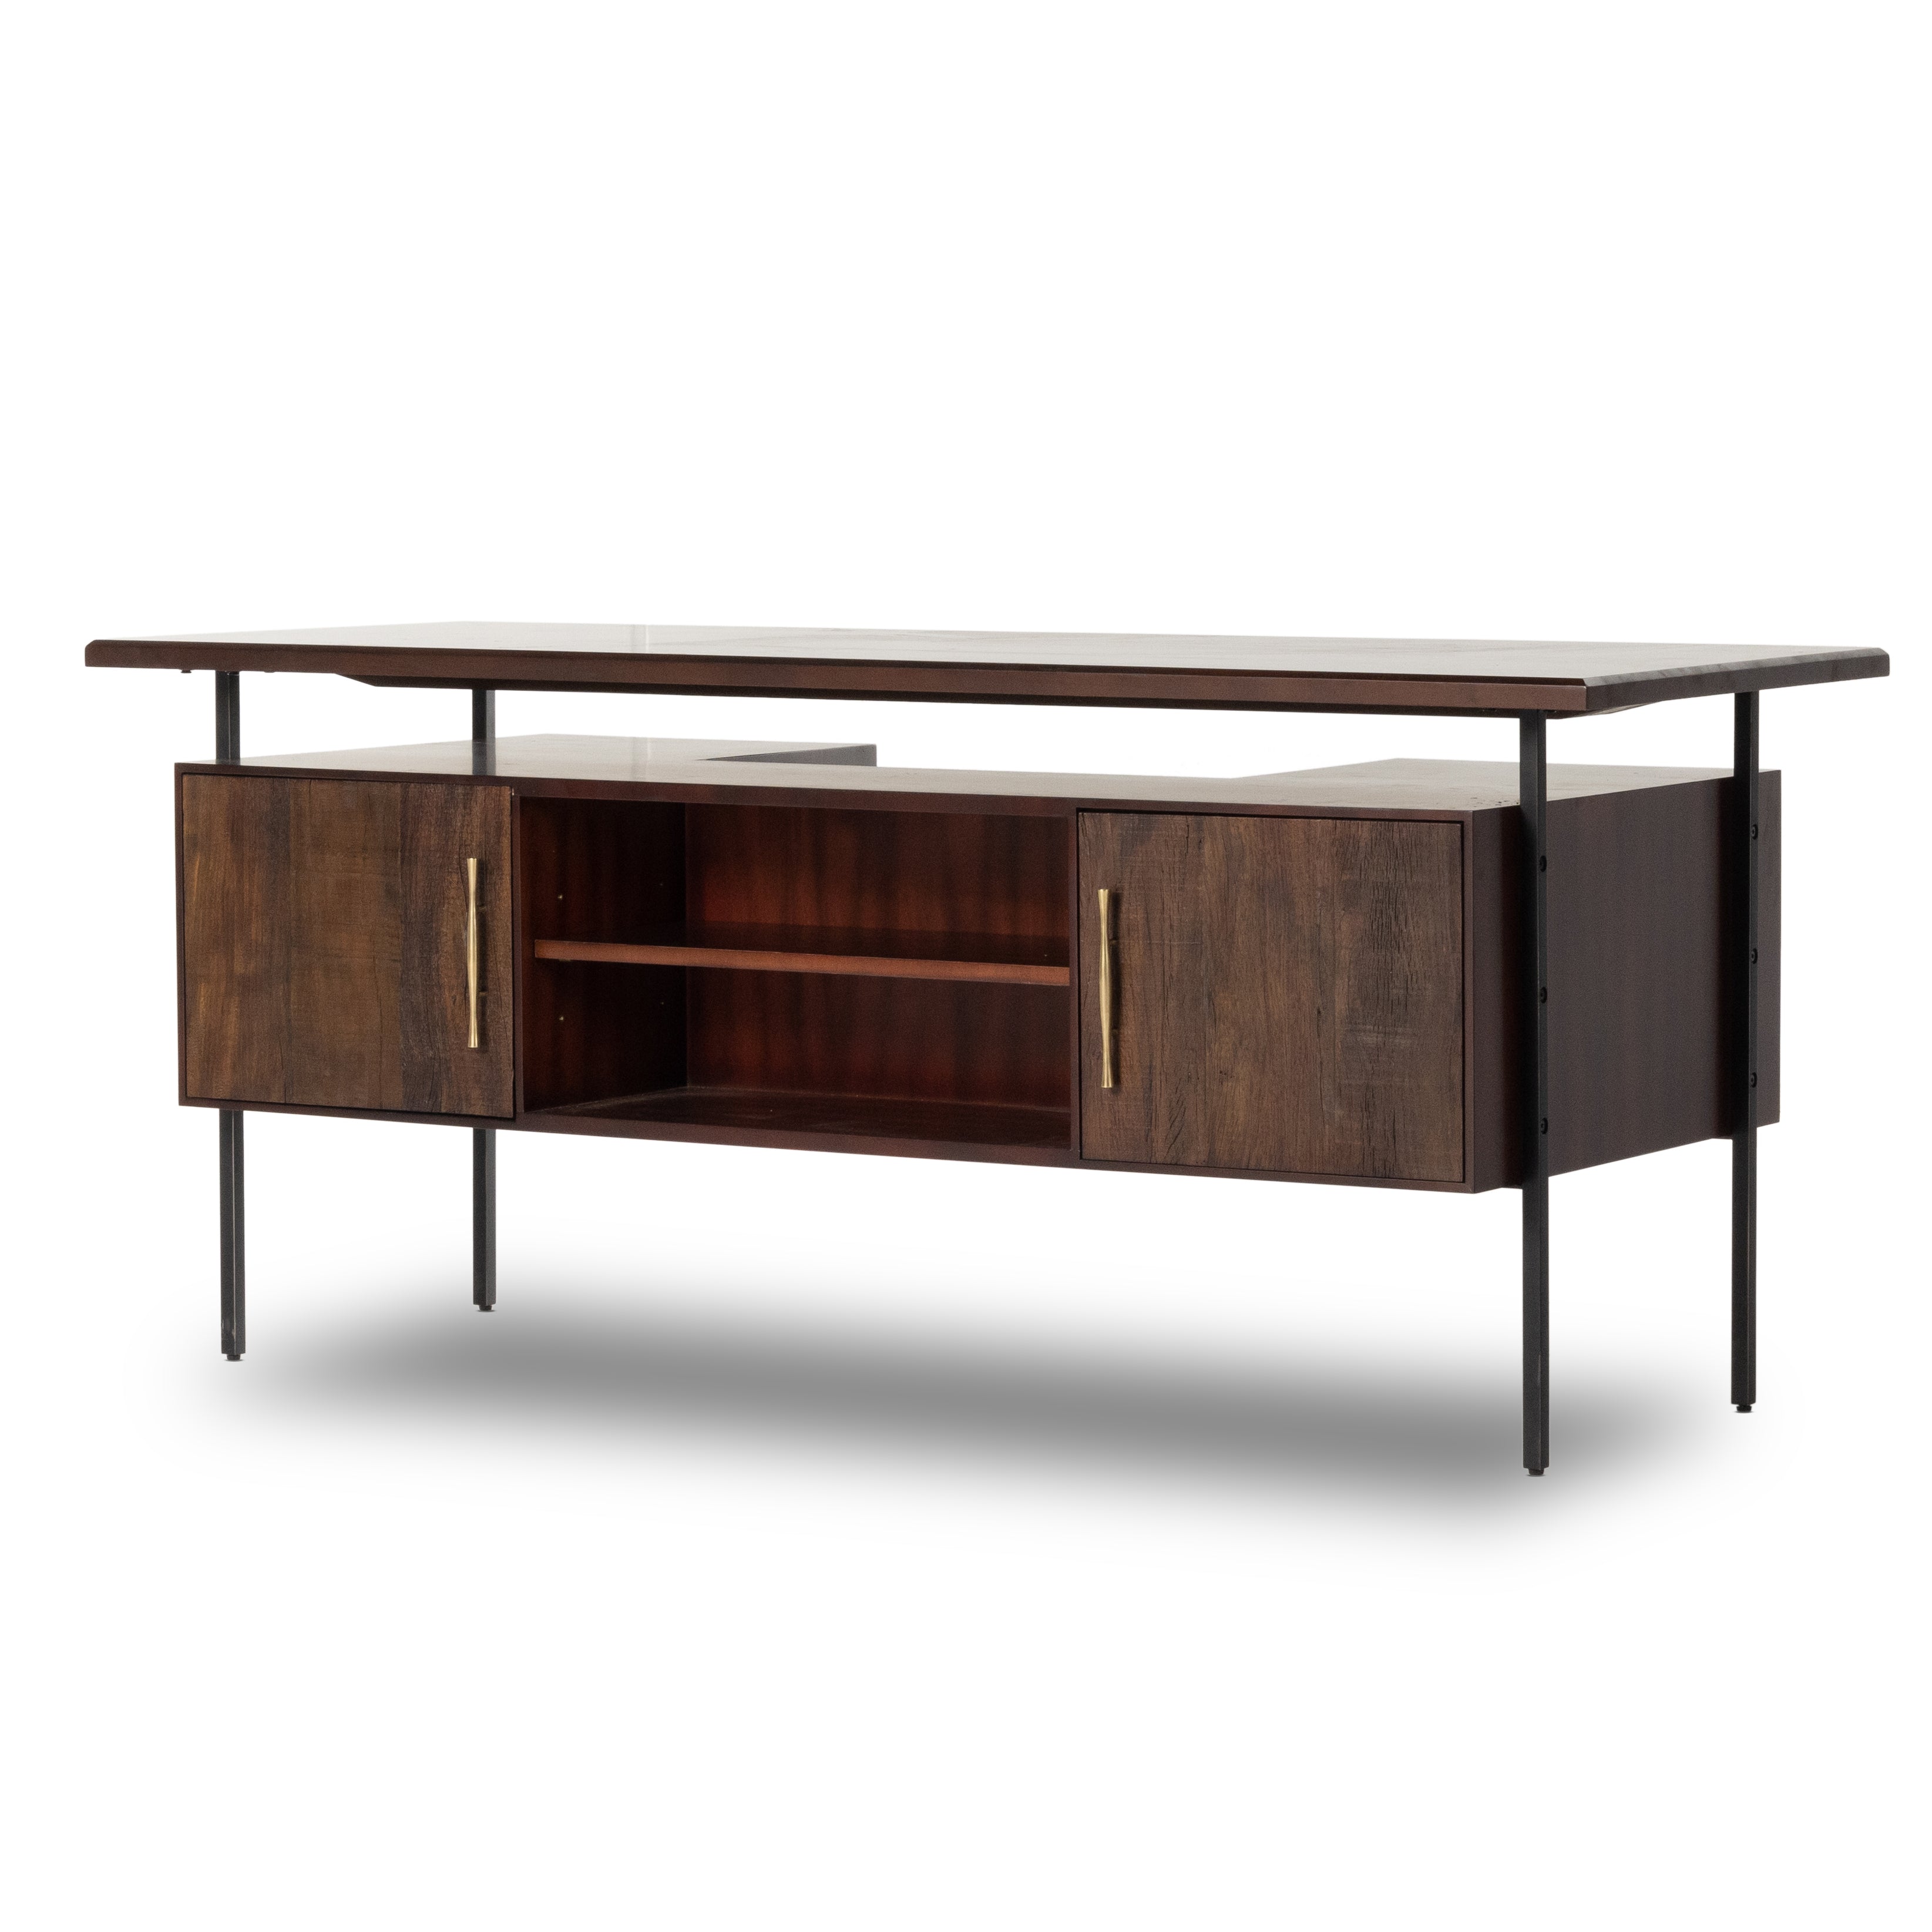 This mid-century inspired lawyer's desk offers heavy-duty storage with two-sided cabinetry. A floating top and simple iron legs keeps the look light and modern. Solid acacia casing with reclaimed peroba wood door and drawer fronts. This piece is designed in collaboration with Thomas Bina. Amethyst Home provides interior design, new construction, custom furniture, and area rugs in the Miami metro area.